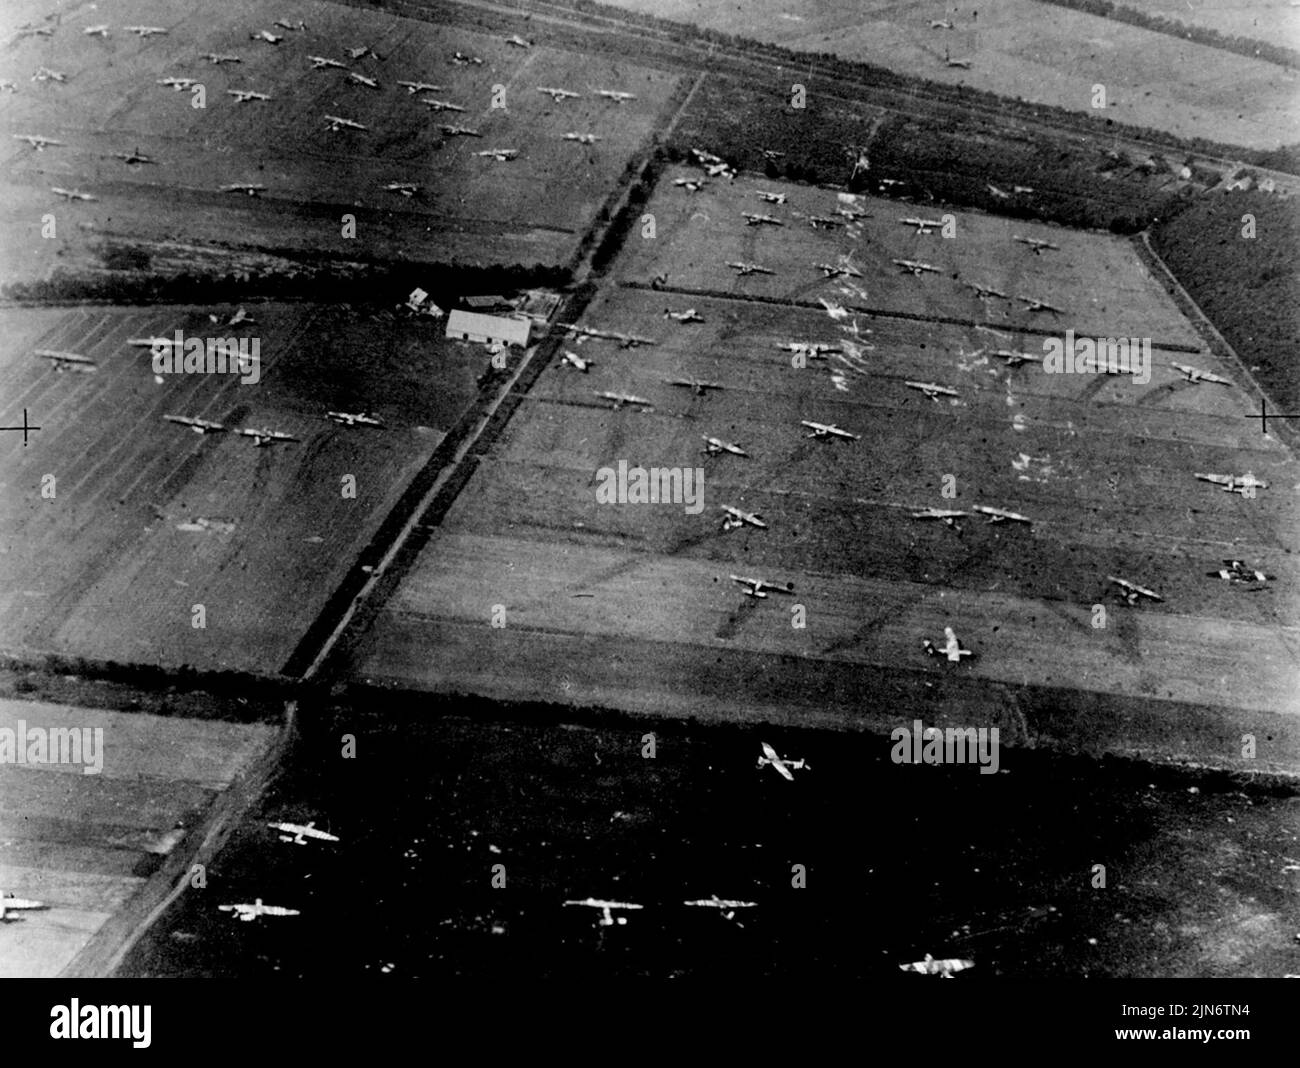 First Airborne Army Lands In Holland -- Pictures taken from an R.A.F photographic Reconnaissance spitfire, of the scene in Holland when the Allied airborne army carried out its first great operation on September 17th. Gliders filling one end of the filed after the great allied invasion. November 20, 1944. (Photo by British Official Photograph). Stock Photo